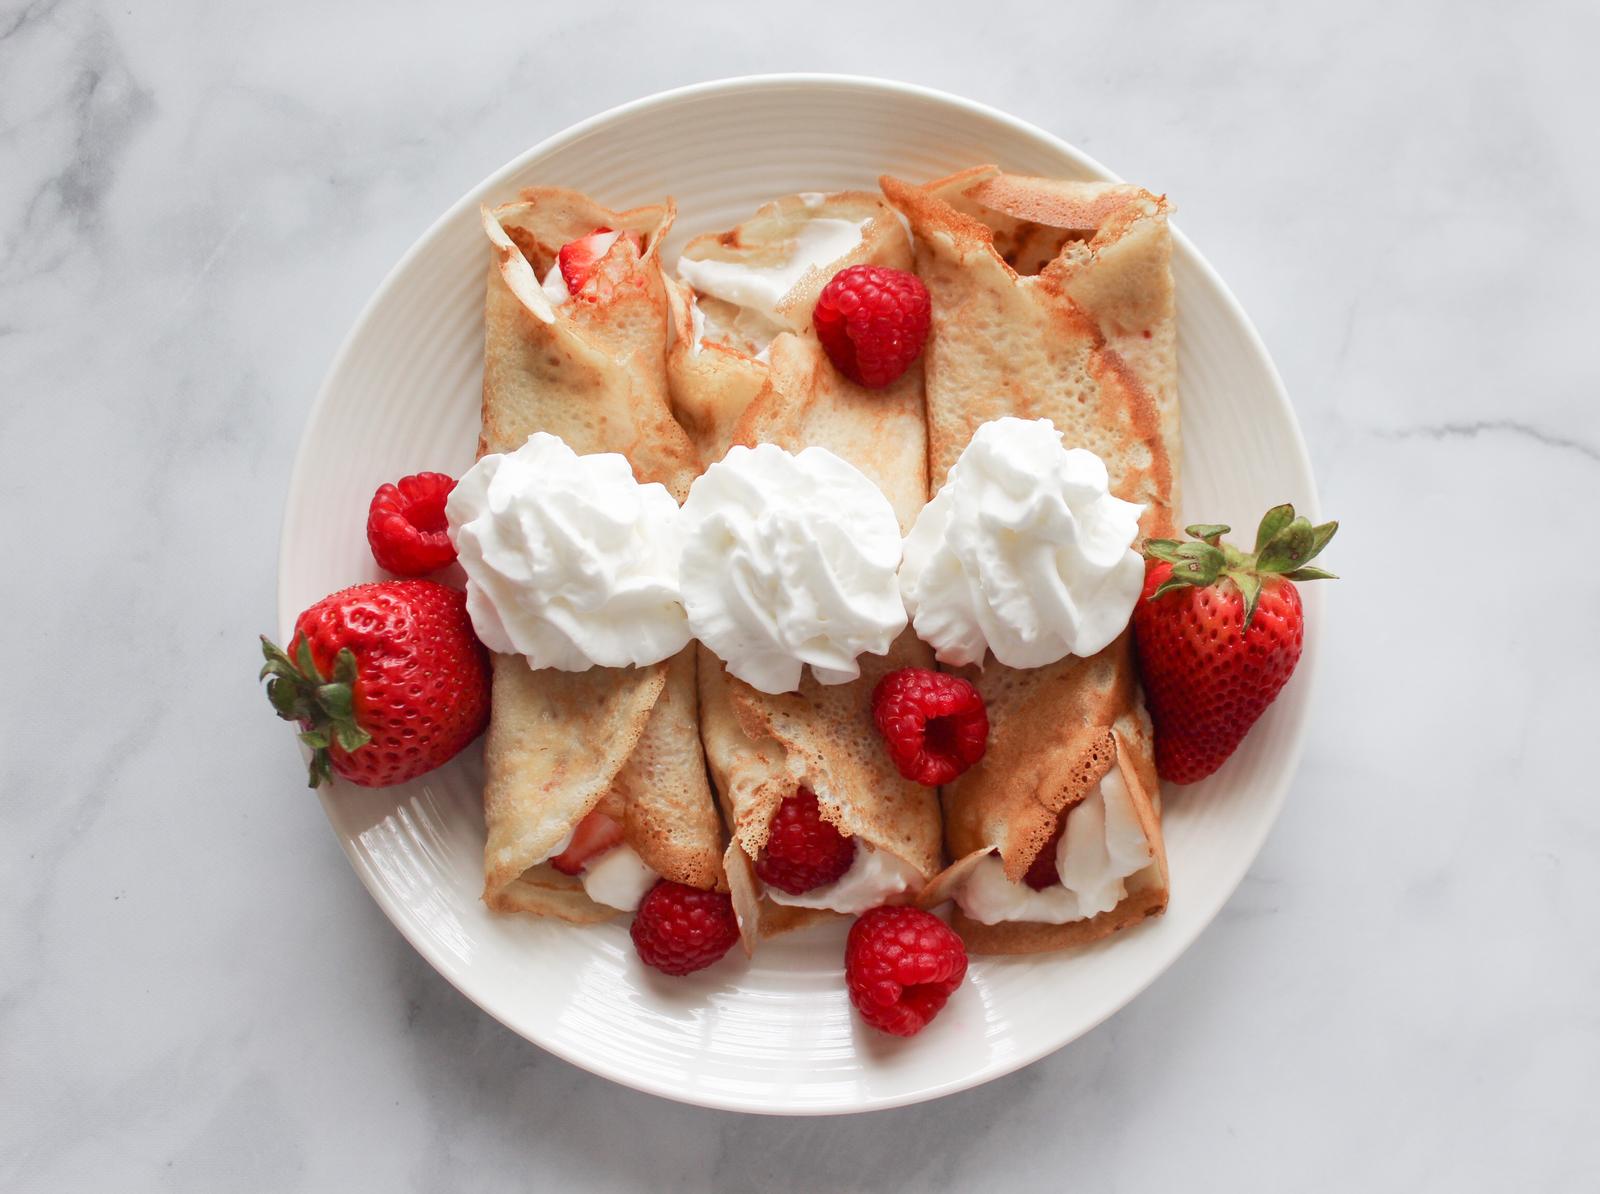 Eat a 🥂 Bougie Brunch and We’ll Determine What 🎉 Holiday Matches Your Vibe Crêpes